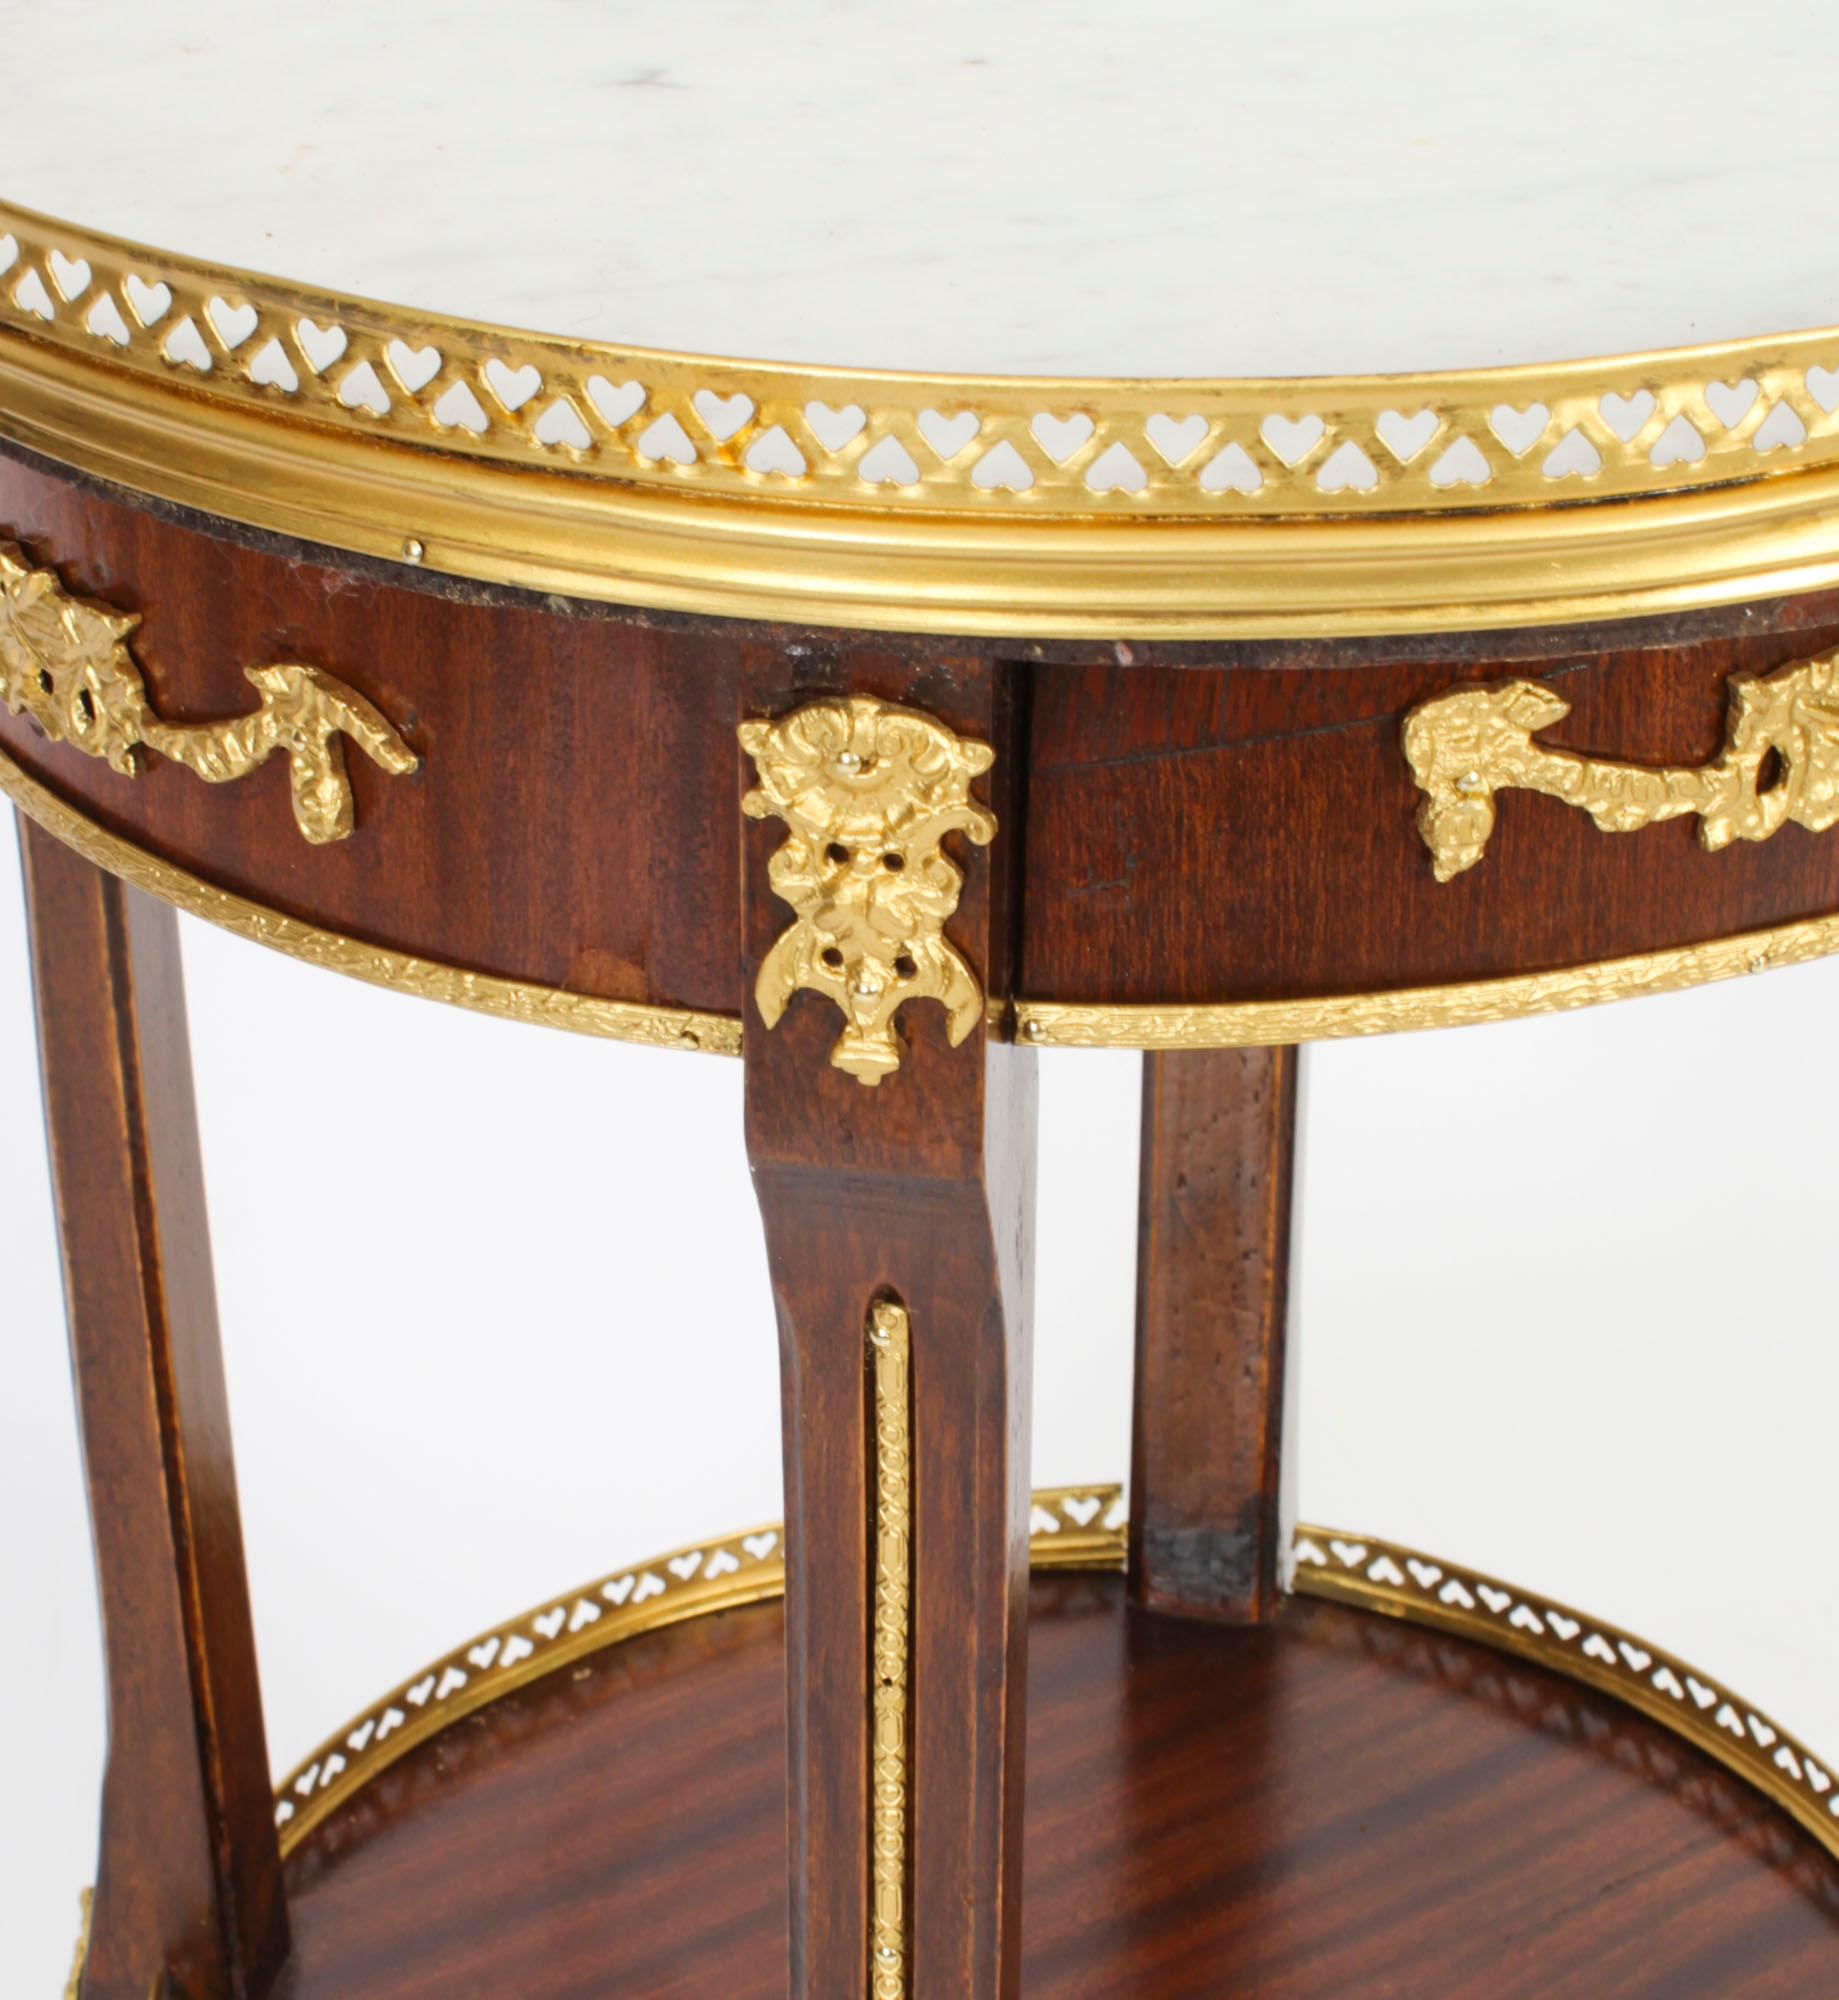 Antique French Empire Marble & Ormolu Occasional Table, 19th Century For Sale 5